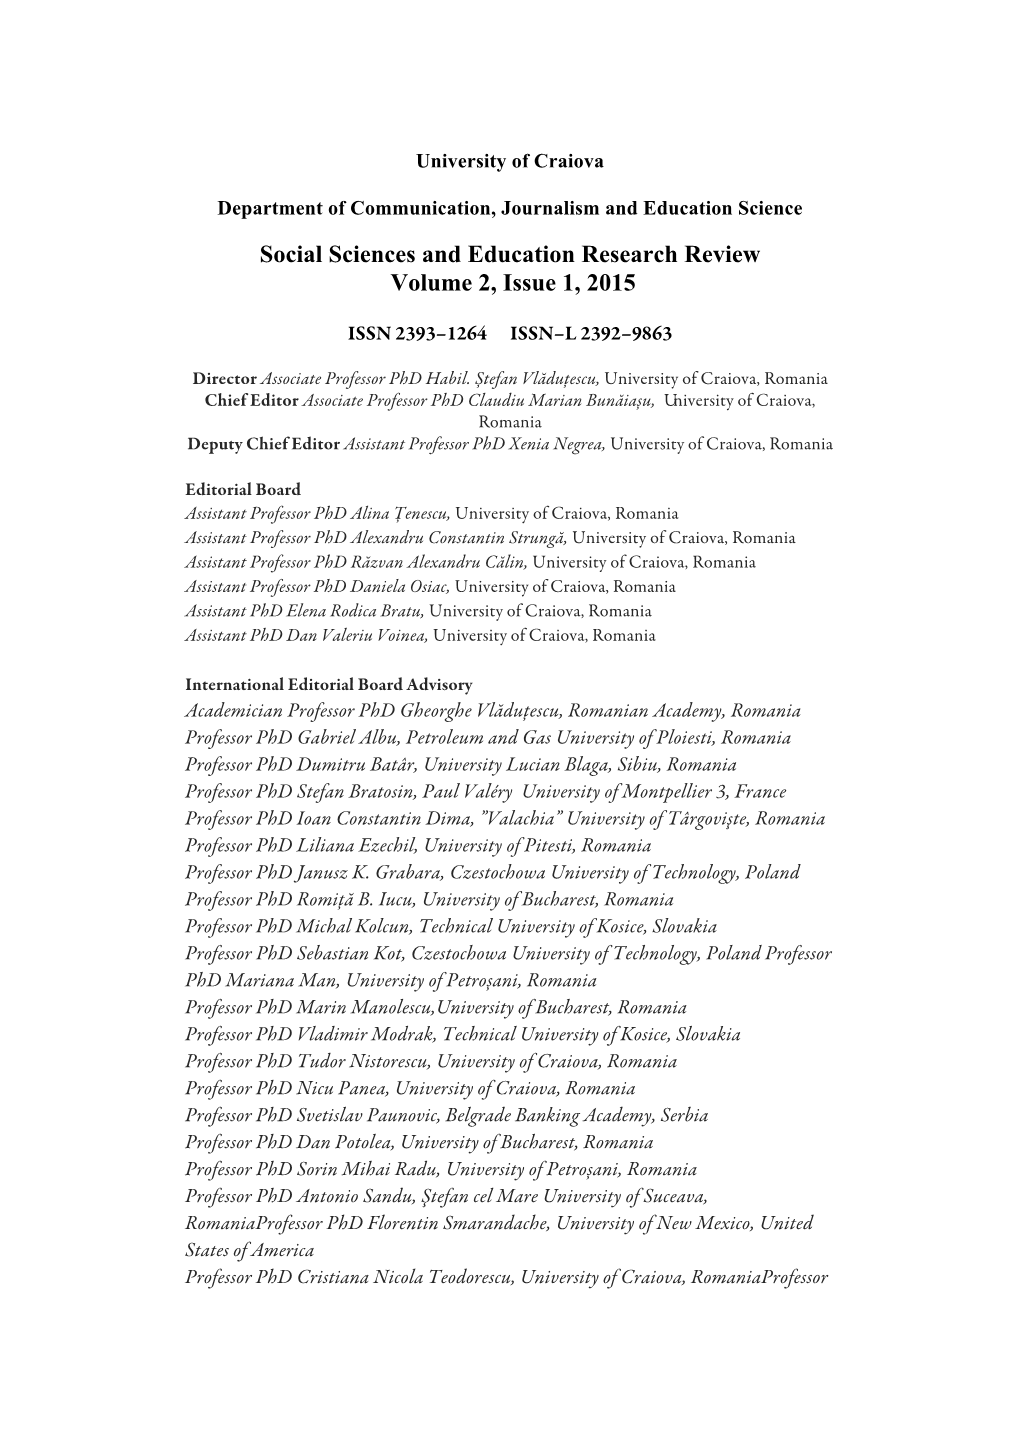 Social Sciences and Education Research Review Volume 2, Issue 1, 2015